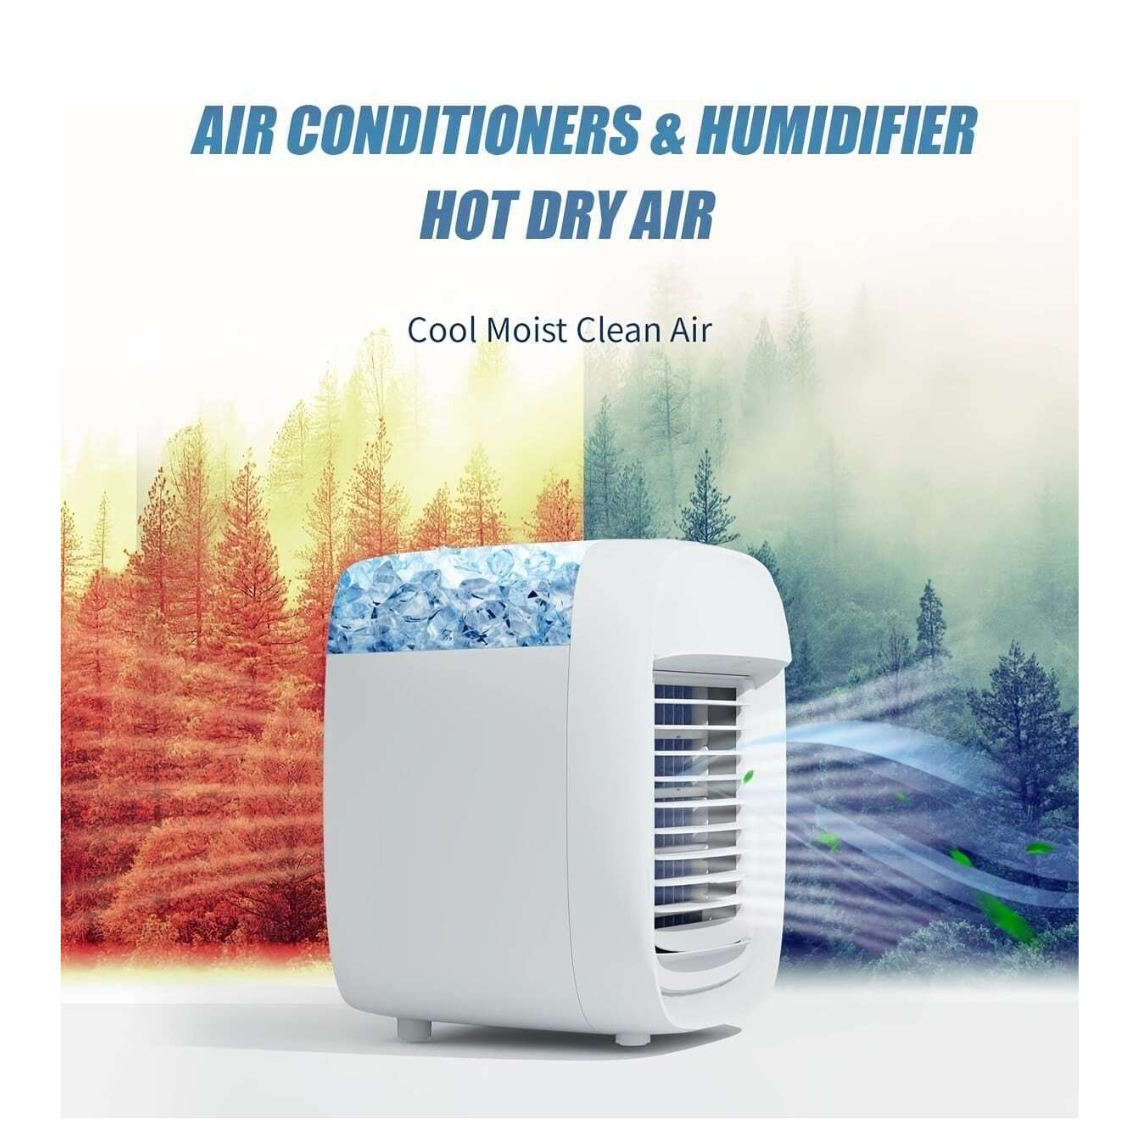 Chill Anywhere, Anytime: Portable Personal Air Conditioner with 3 Speeds, Mini Fan, 880ML Water Tank, and 7 Colors Night Light for Small Spaces!